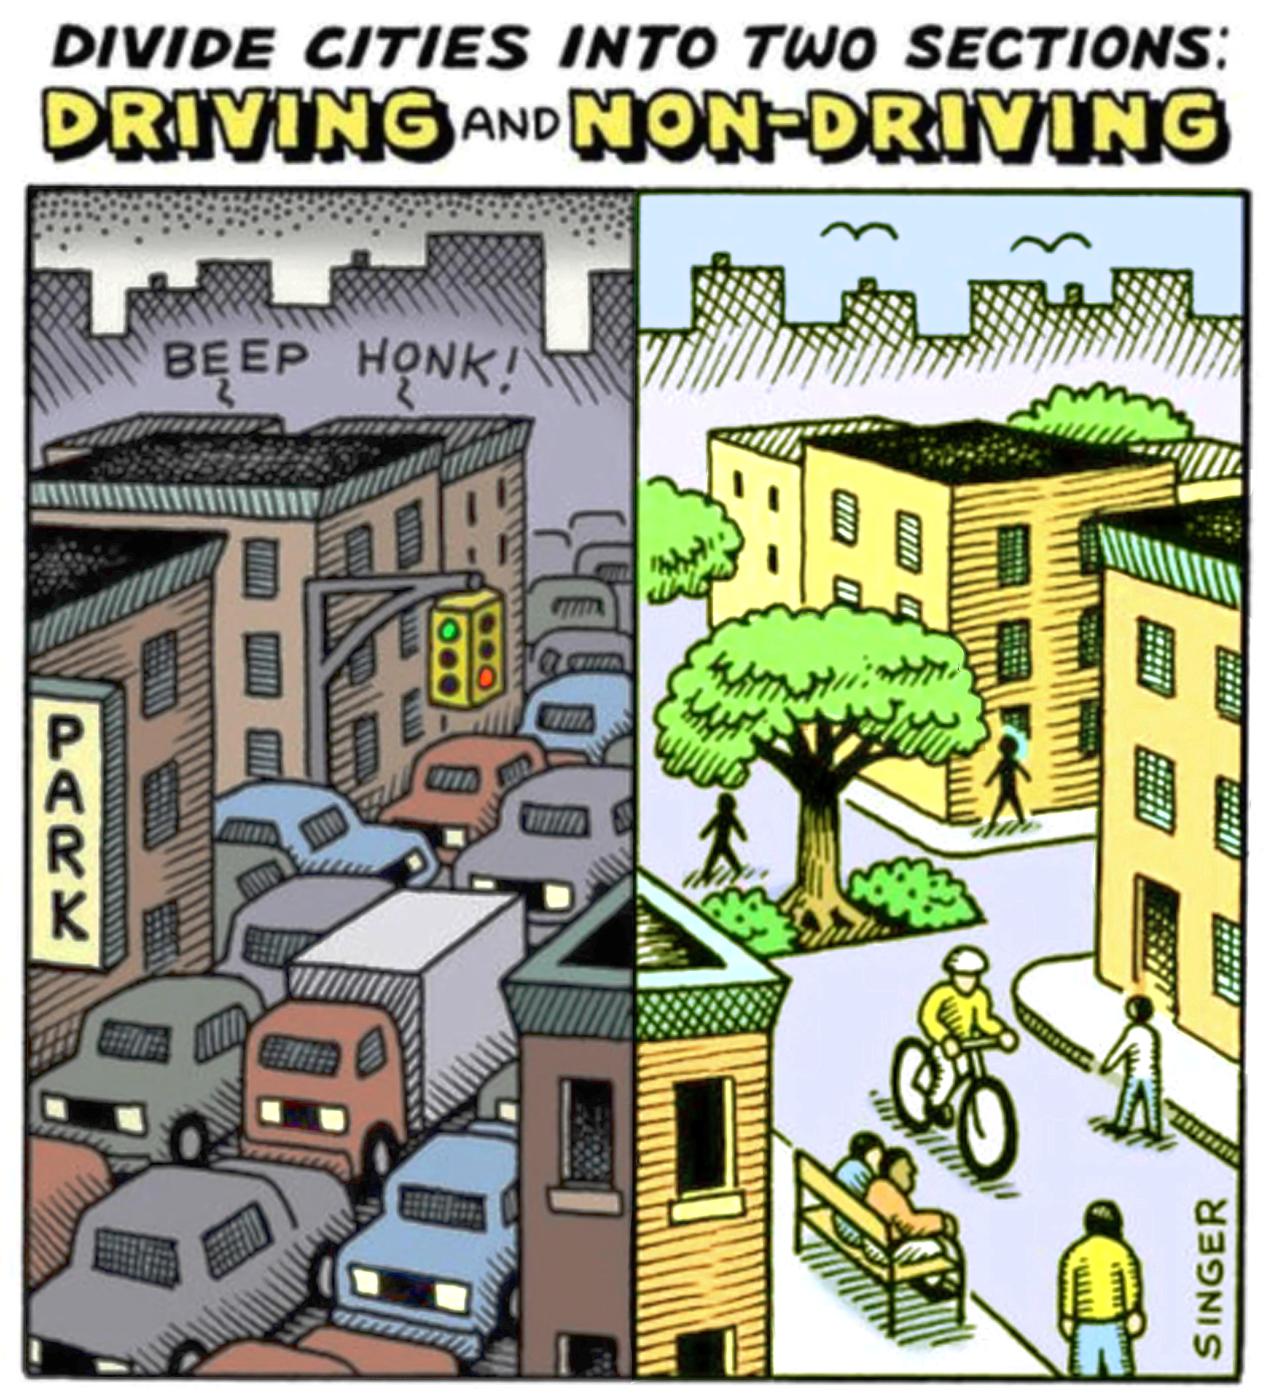 Divide cities into two sections: Driving and Non-driving